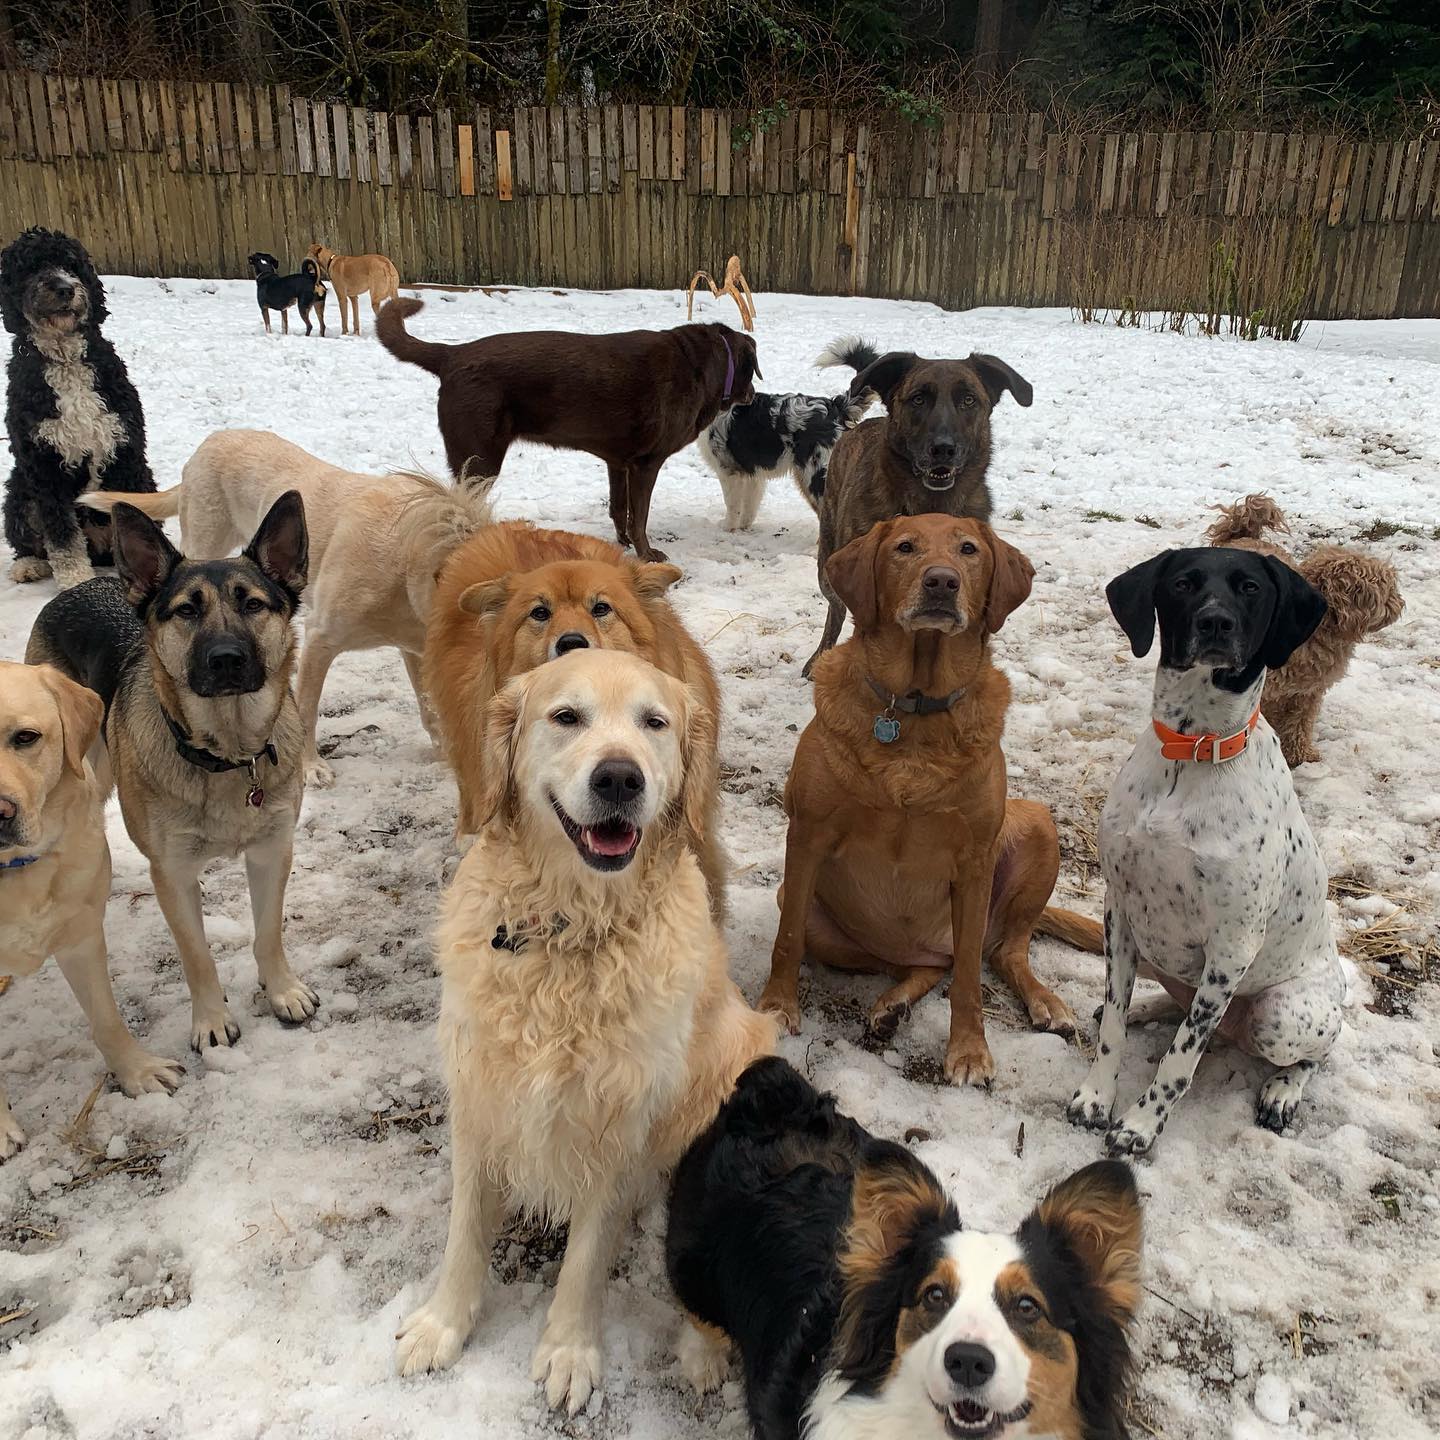 A group of dogs standing in the snow